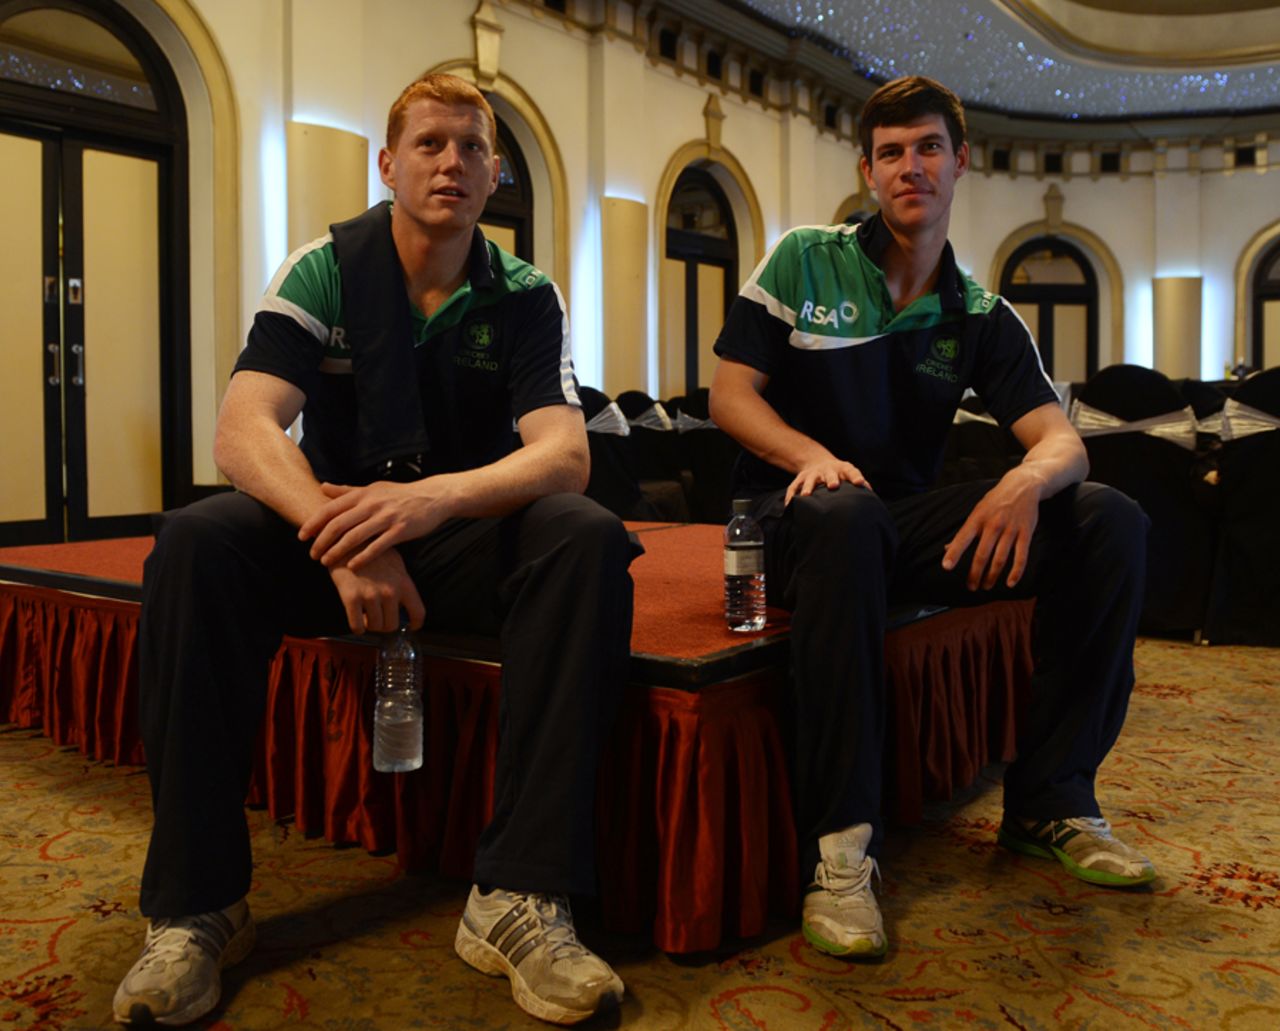 Kevin O'Brien and George Dockrell in an open media session ahead of the World Twenty20, Colombo, September 12, 2012